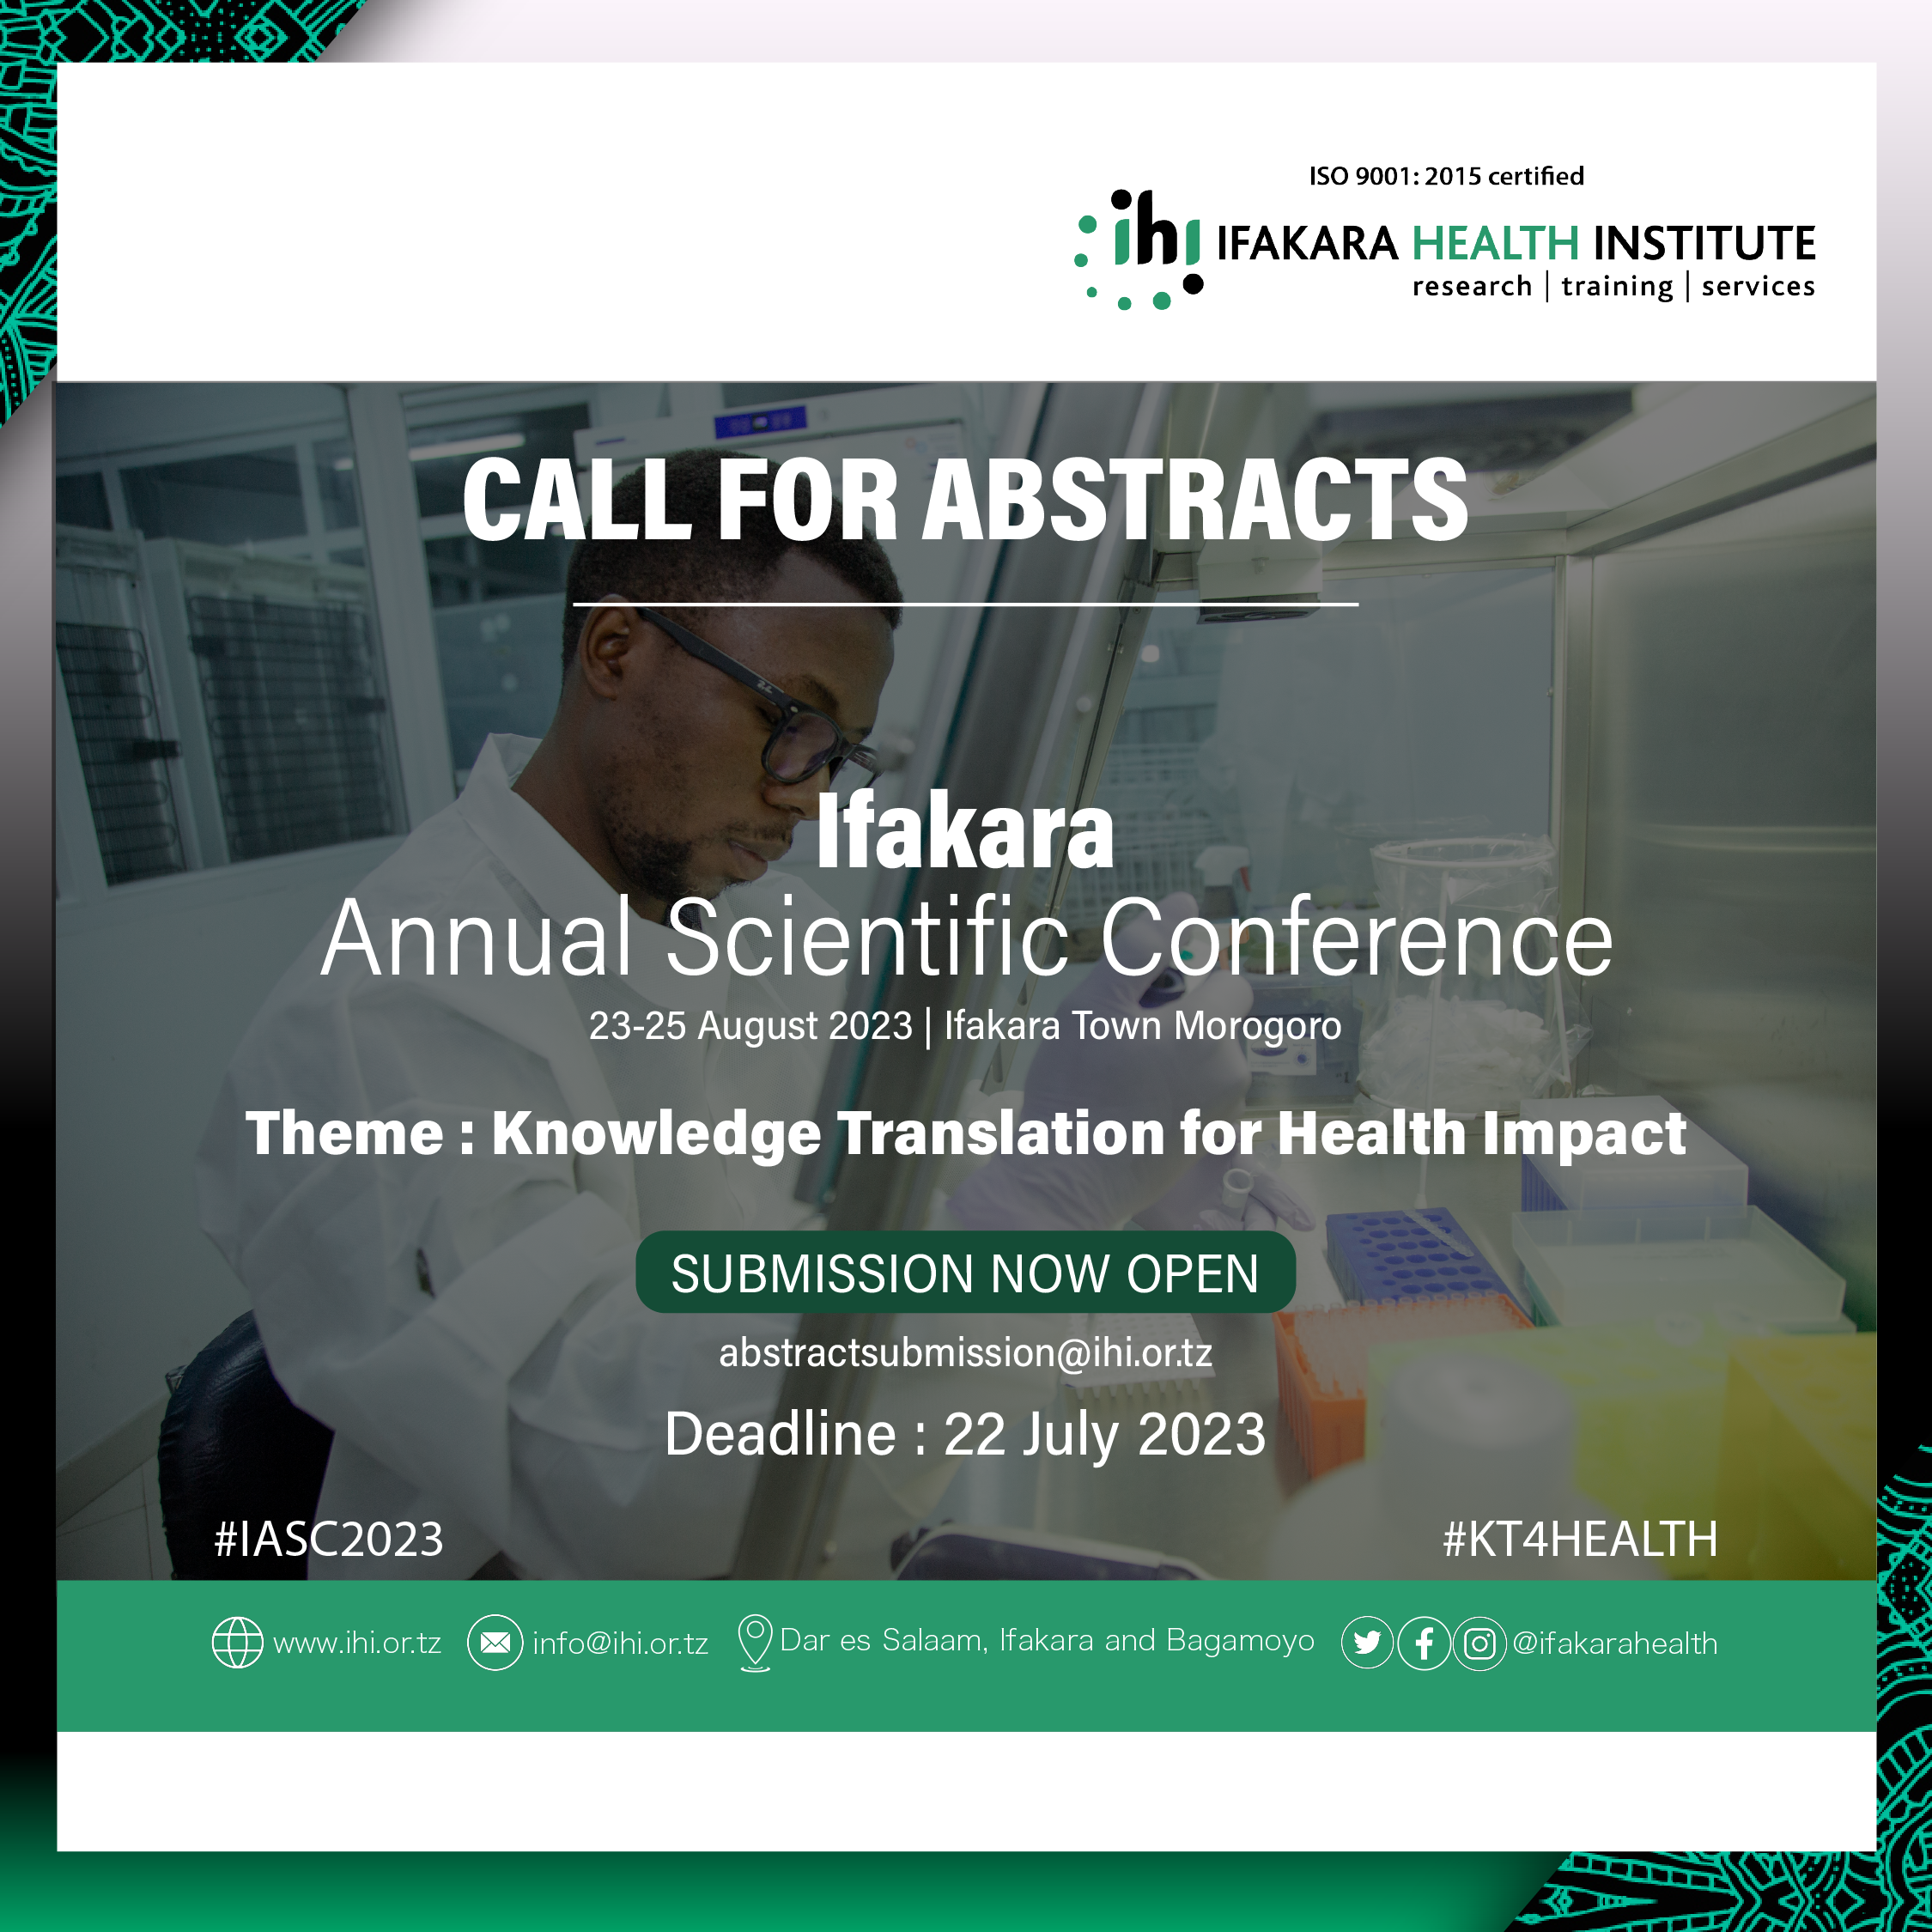 CALL: Ifakara accepts abstracts for its annual scientific conference